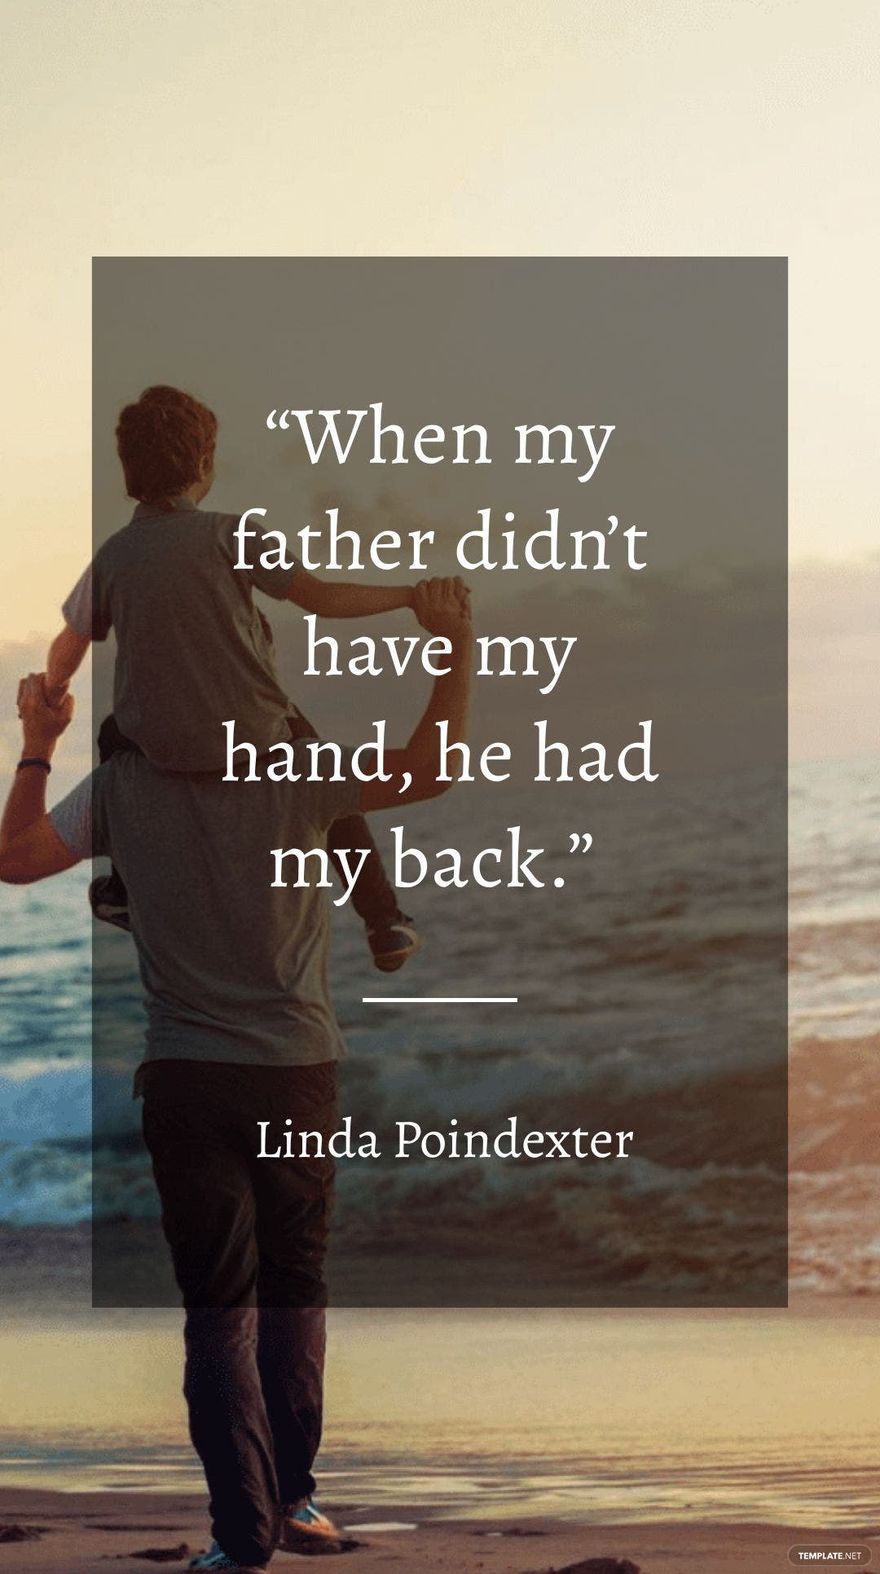 Free Linda Poindexter - When my father didn’t have my hand, he had my back. in JPG